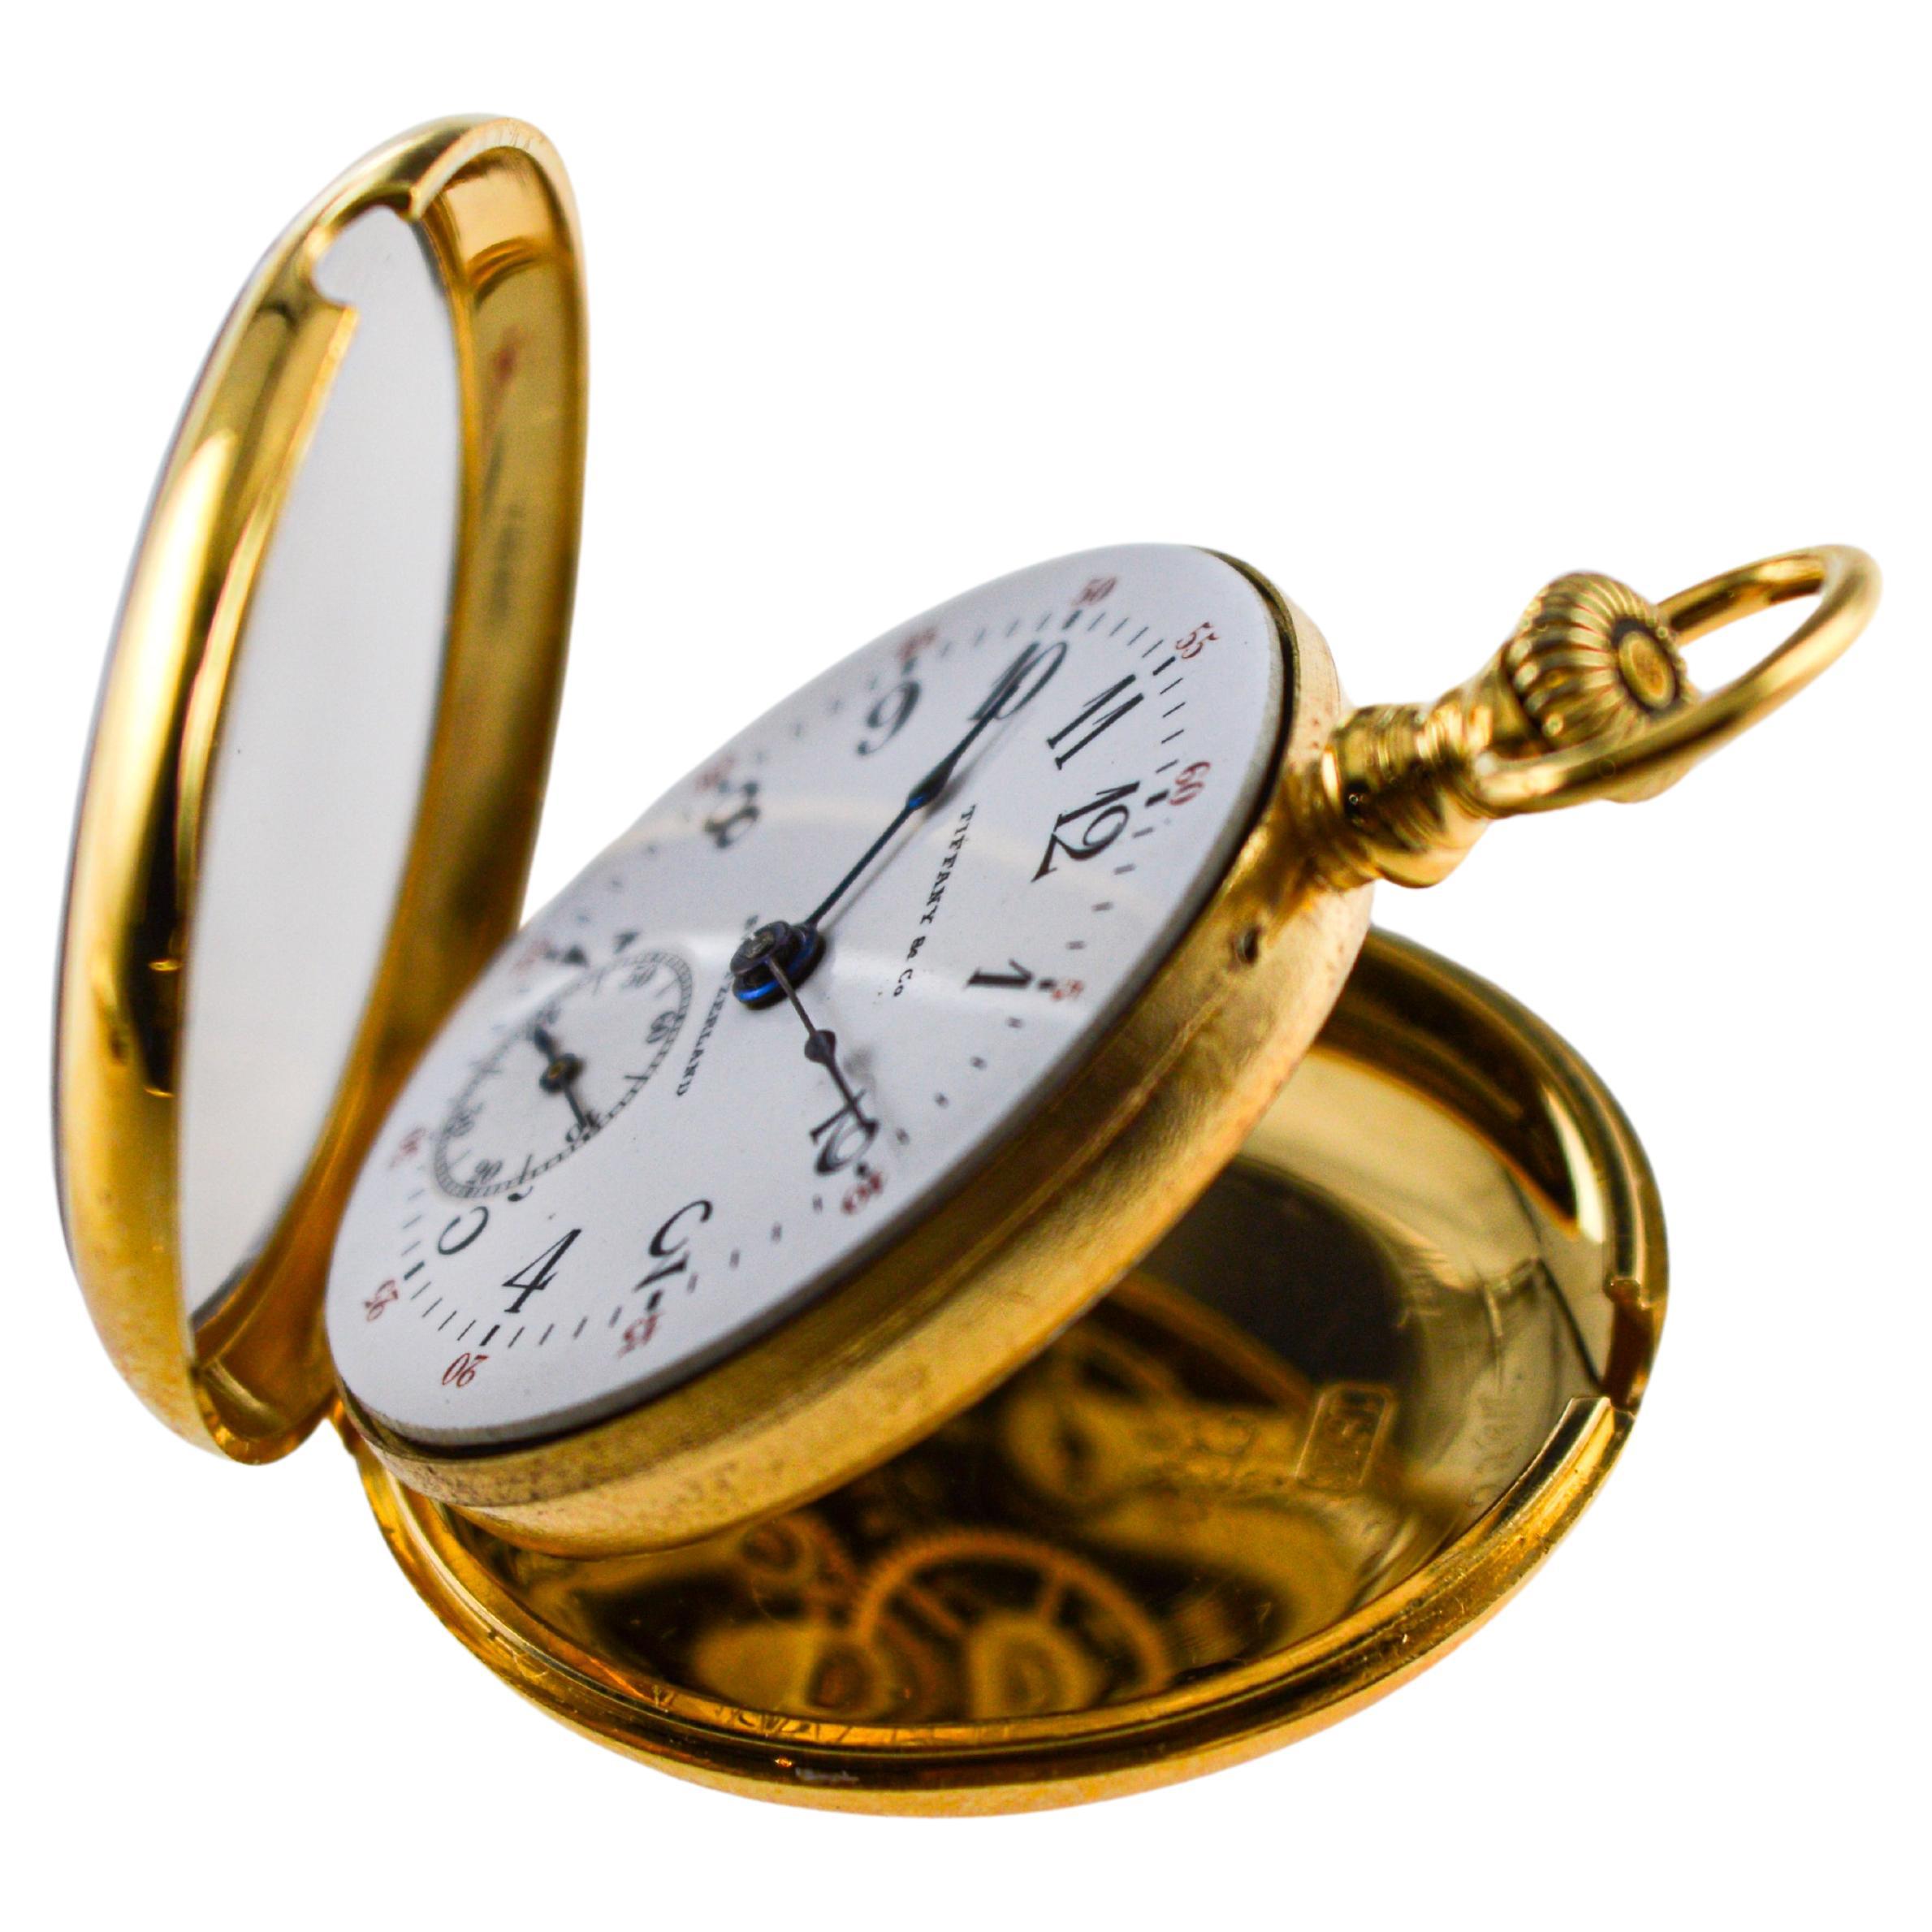 Tiffany & Co 18Kt Gold Pendant Watch with Gold Chain from 1912 Enamel Dial For Sale 3